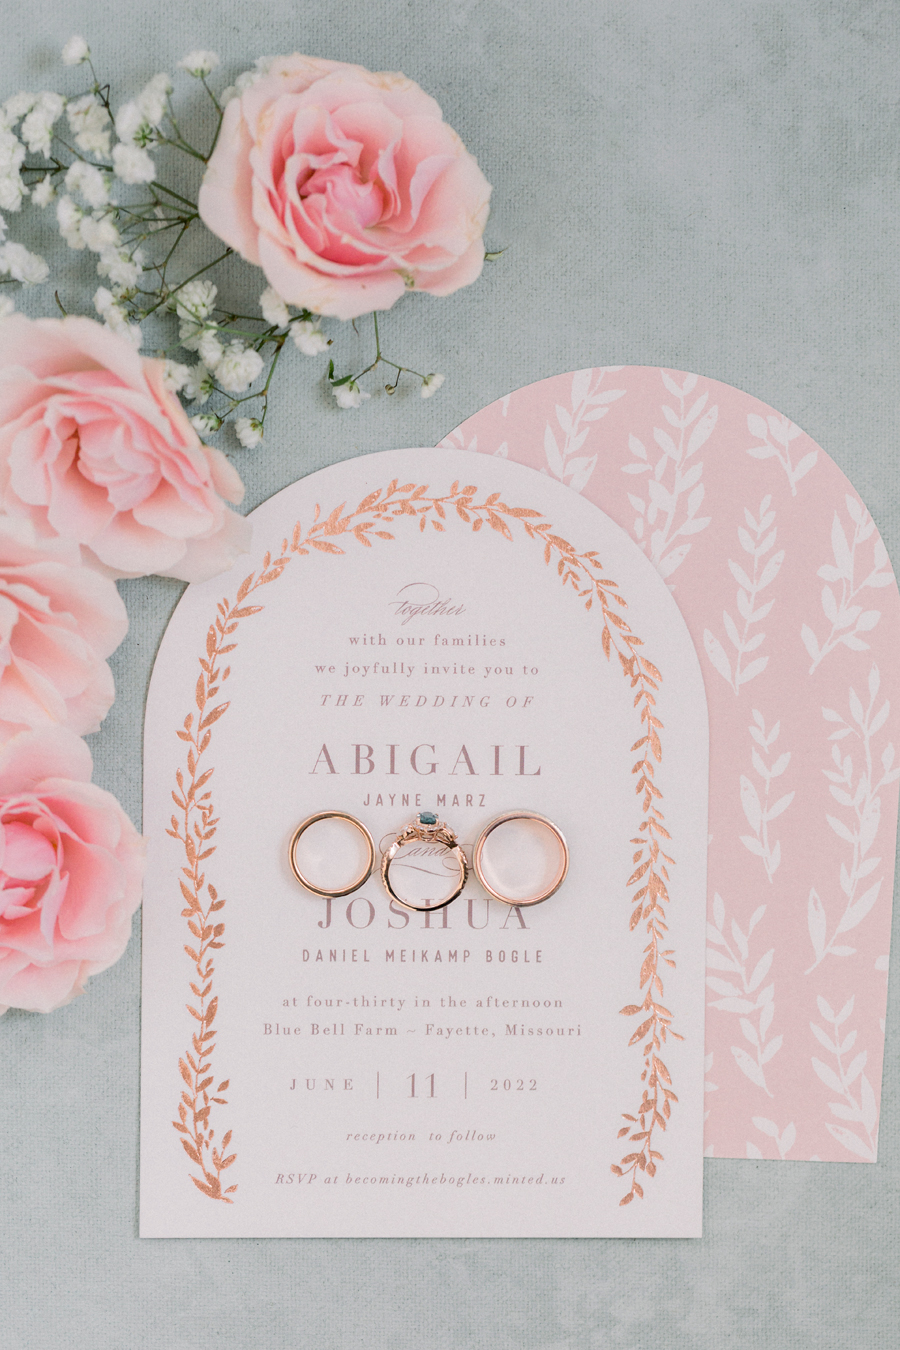 The wedding invitation suite with the couple's rings on it at a Blue Bell Farm wedding by Love Tree Studios.